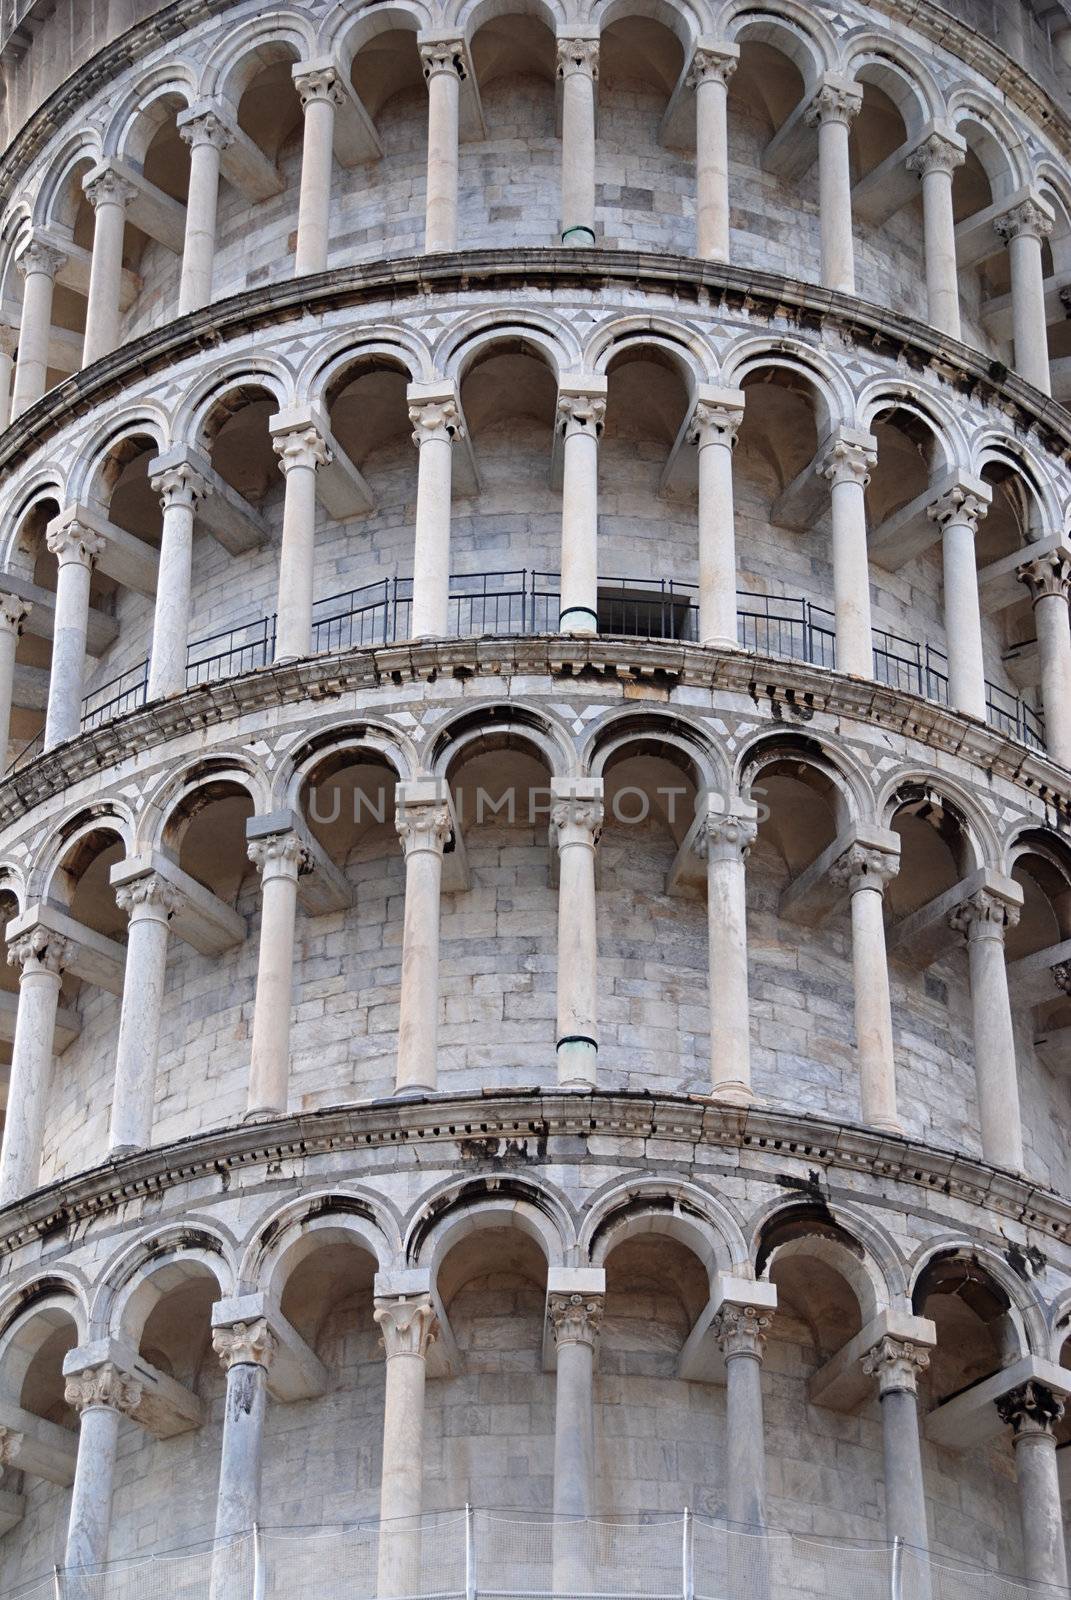 Pisa leaning tower by fyletto